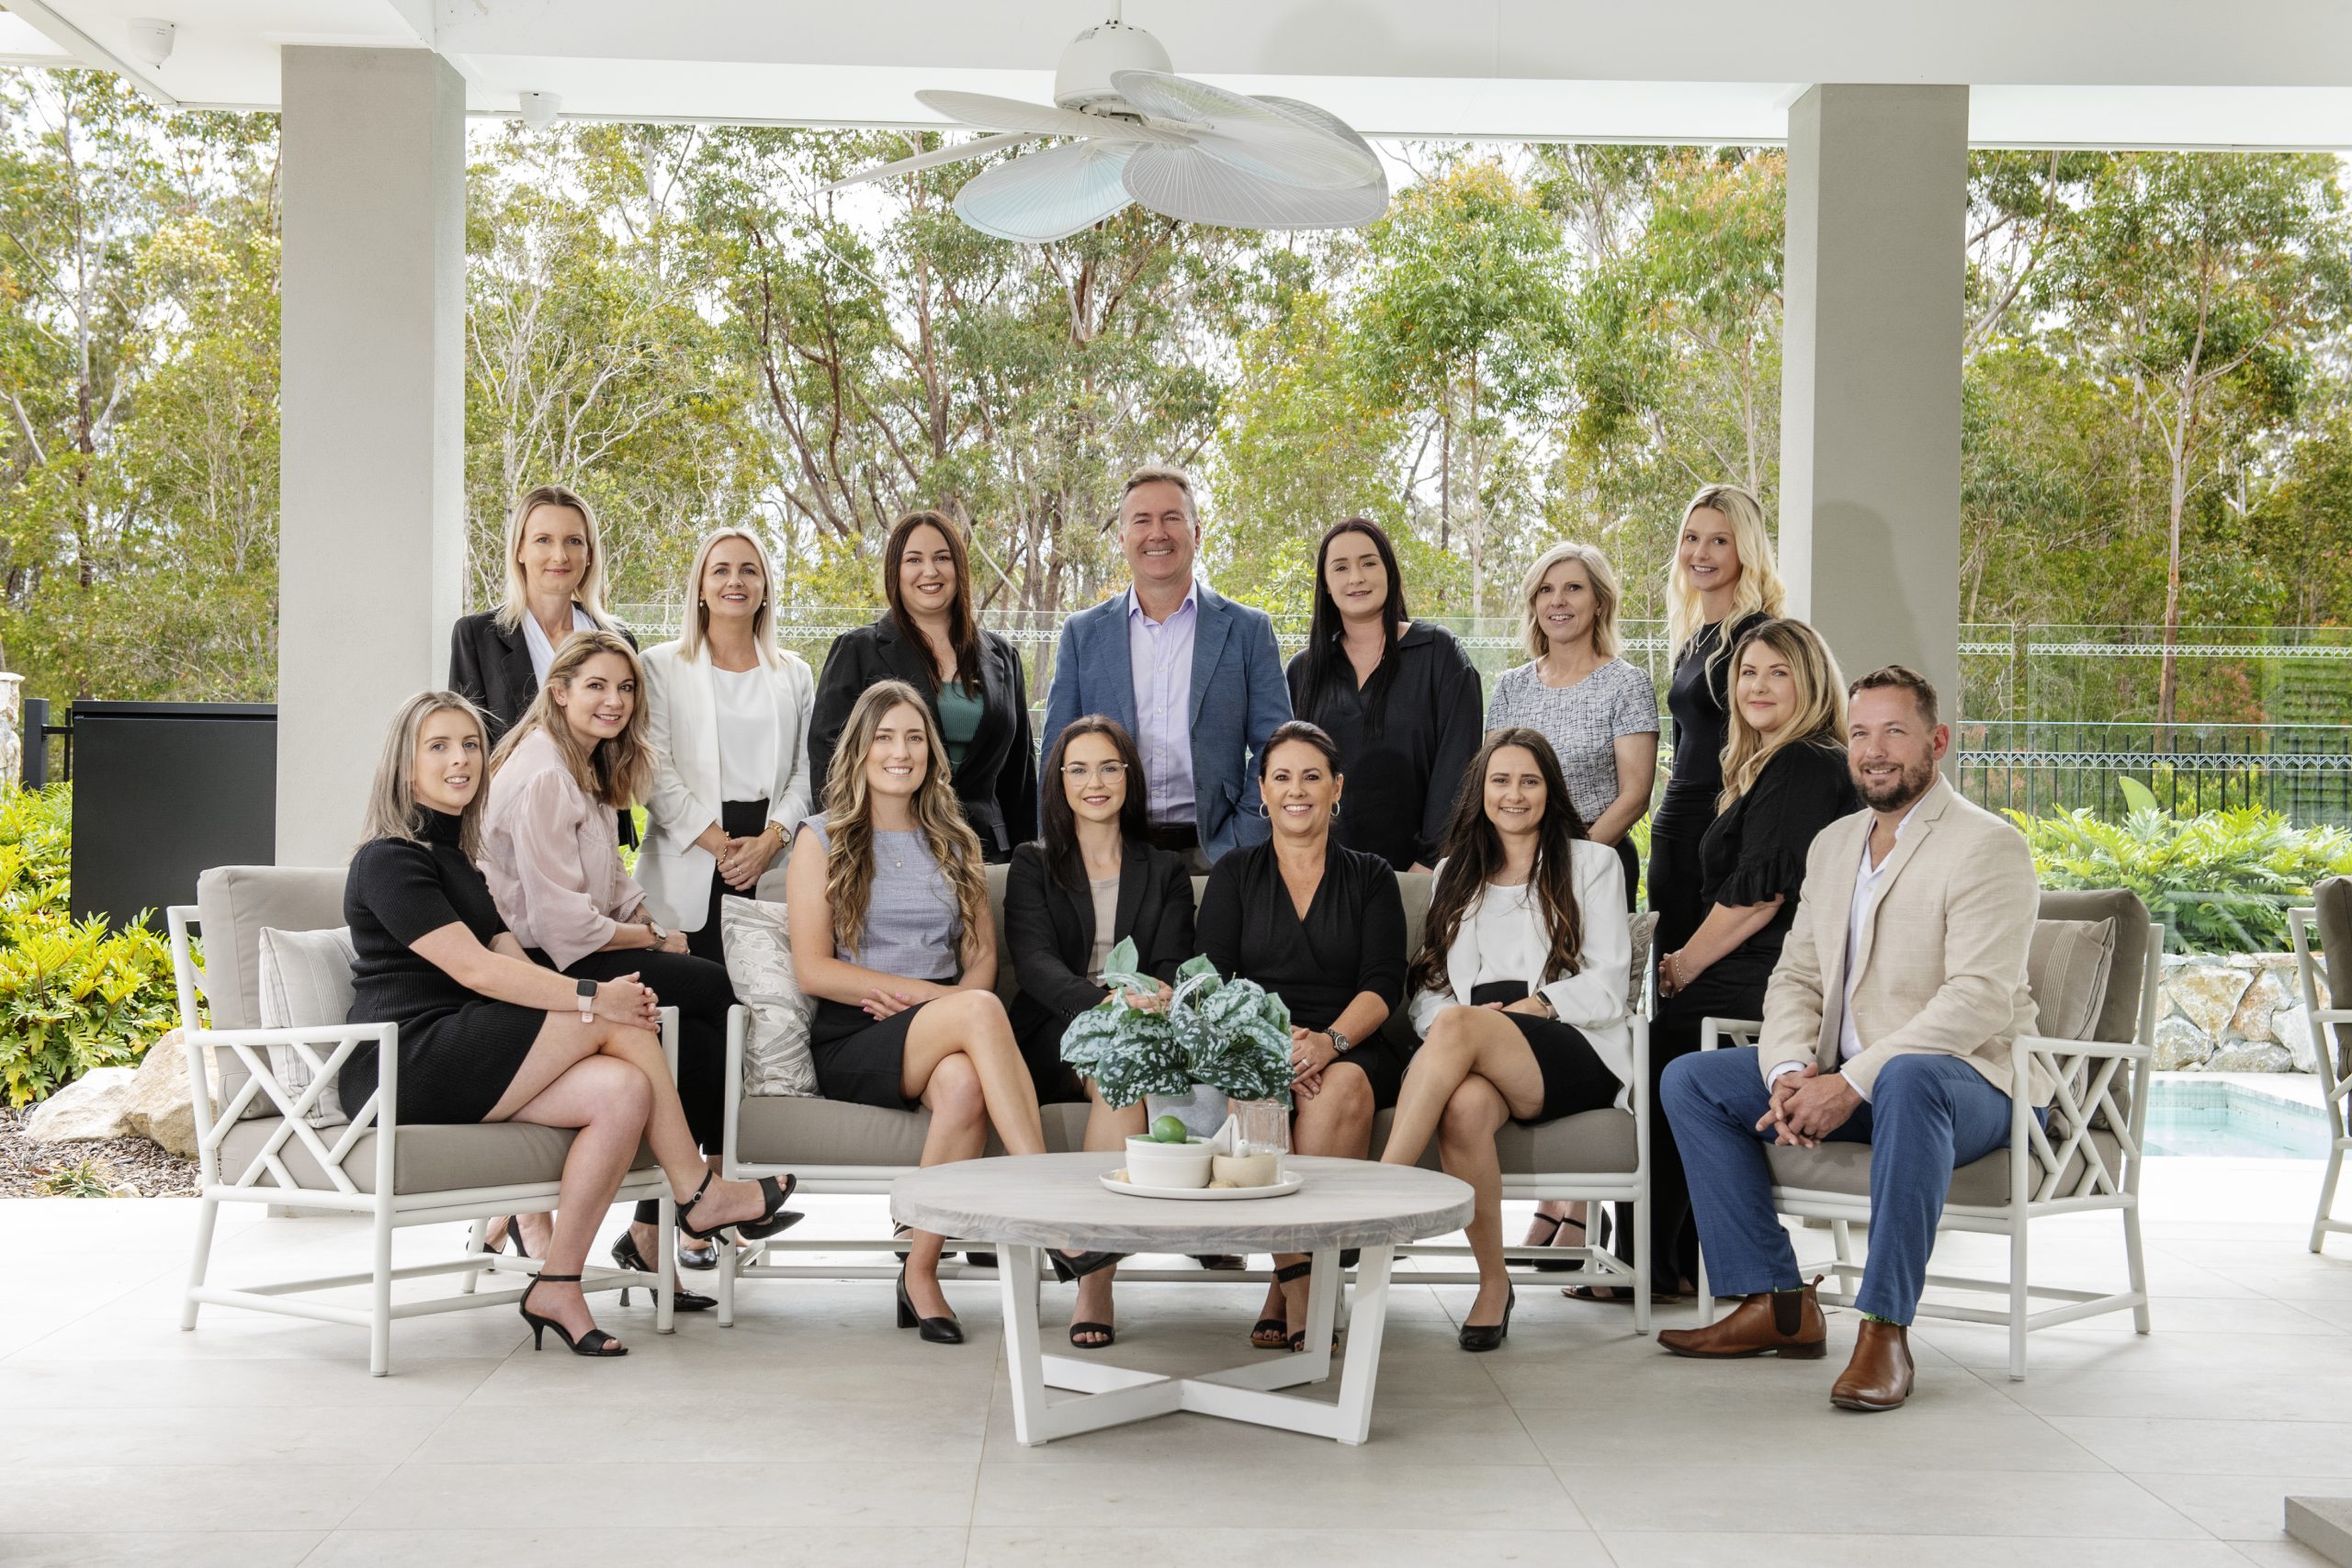 Stone Real Estate's Mid-North Coast Journey Begins with the Grand Opening of Stone Coffs Harbour.